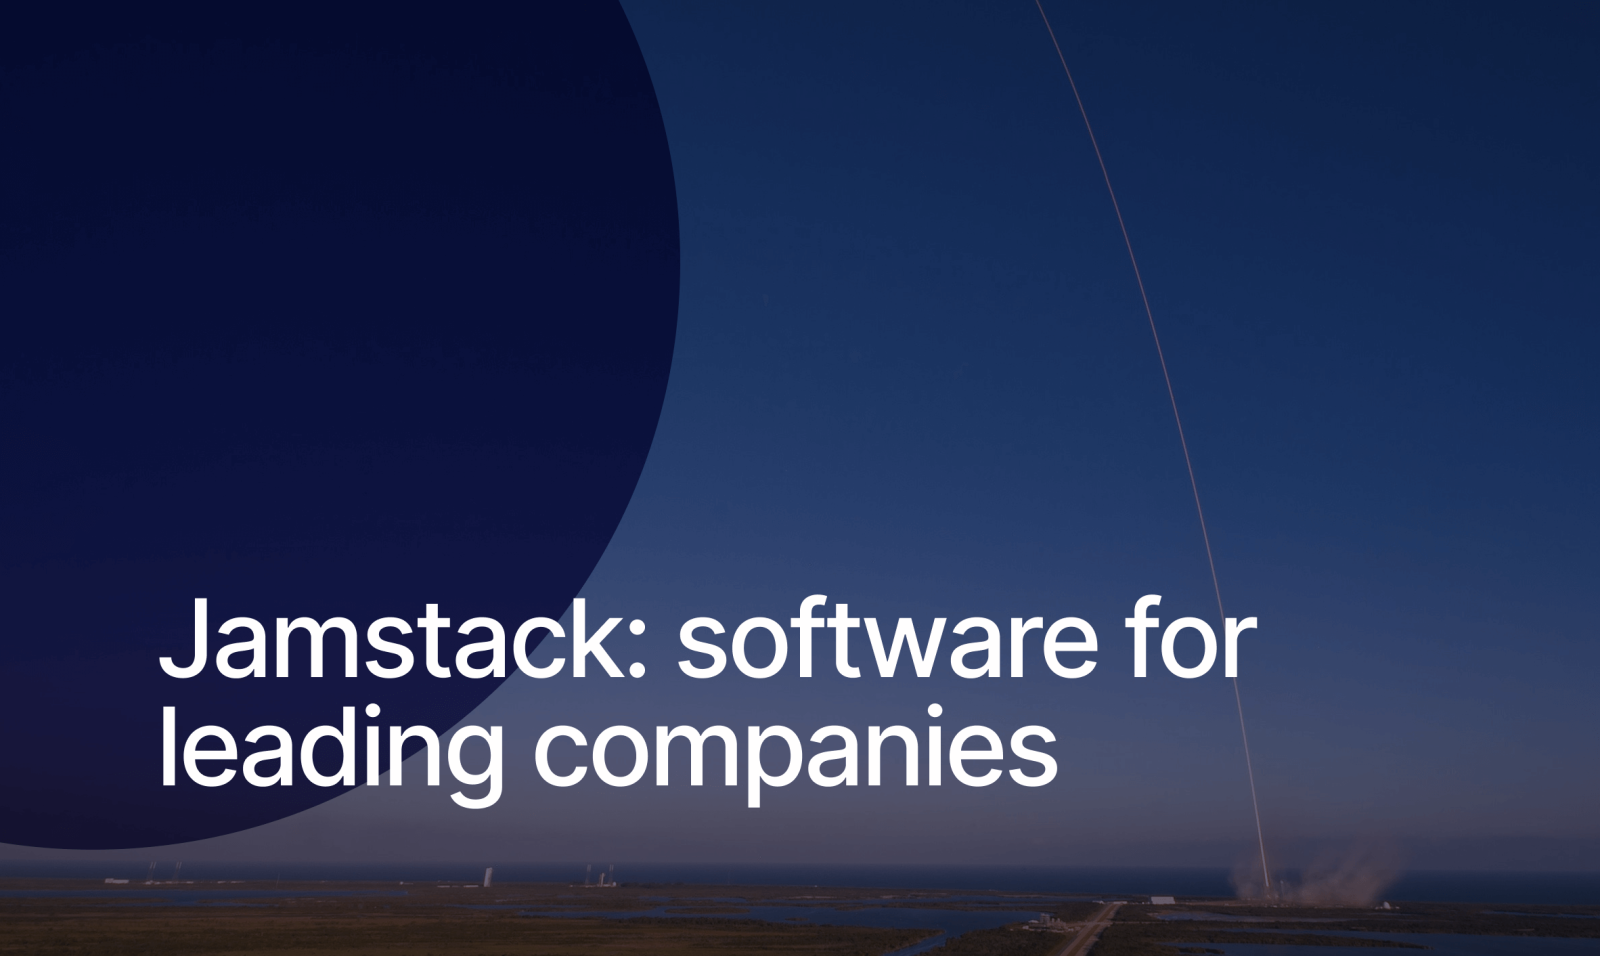 Jamstack software for leading companies